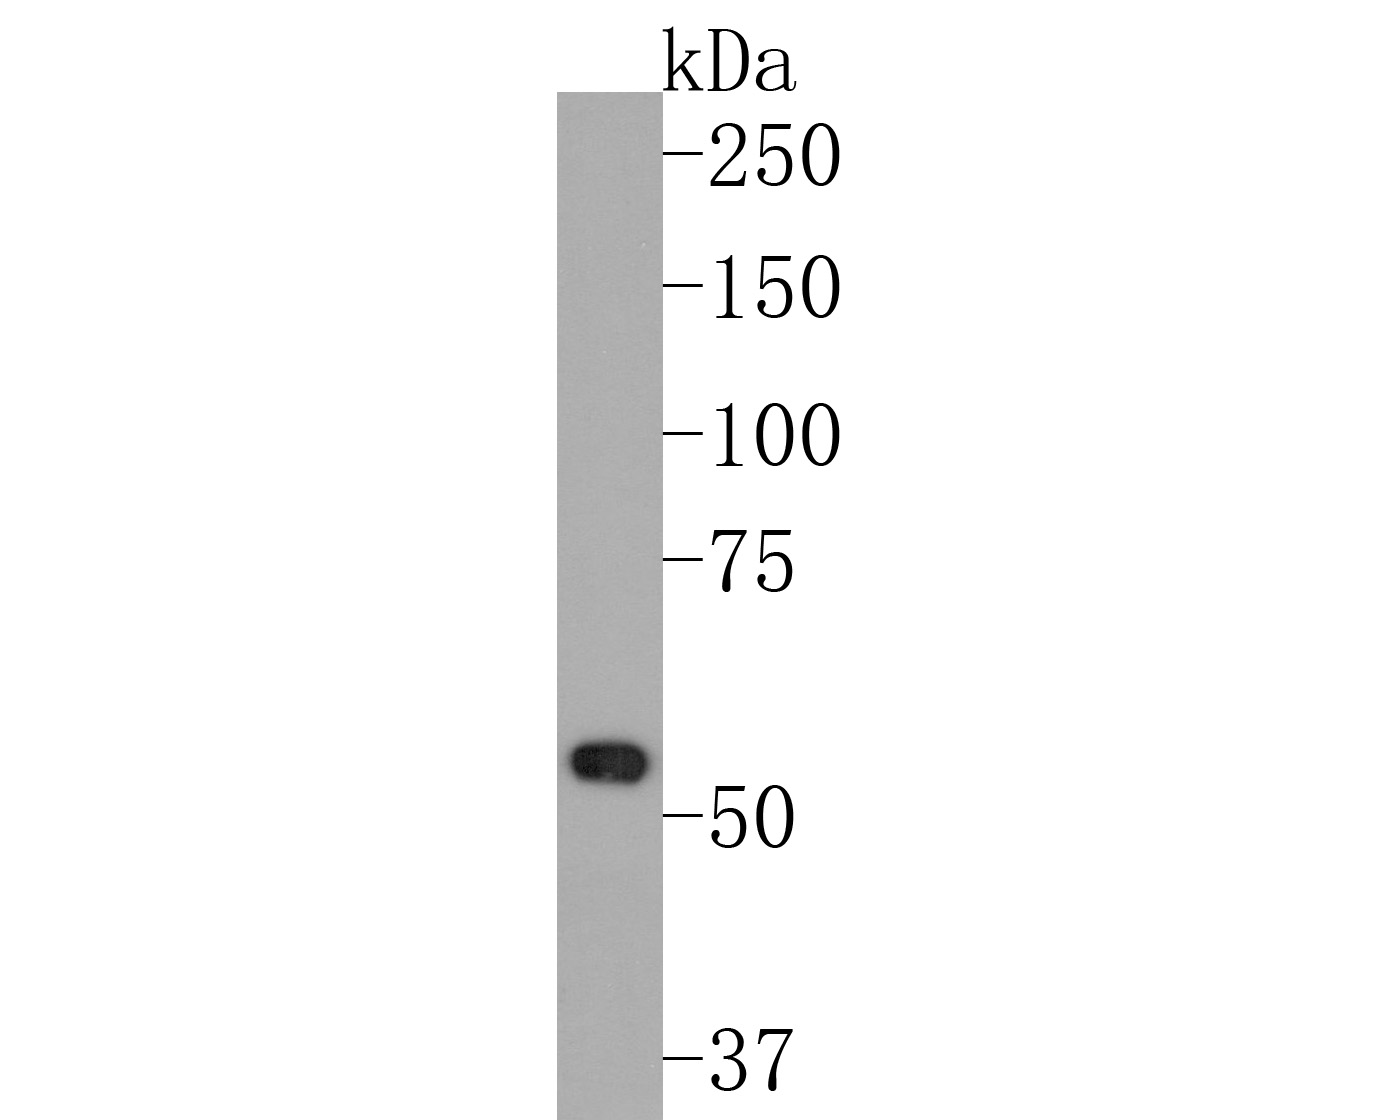 Western blot analysis of Desmin on rat skeletal muscle tissue lysates. Proteins were transferred to a PVDF membrane and blocked with 5% BSA in PBS for 1 hour at room temperature. The primary antibody (ET1606-30, 1/500) was used in 5% BSA at room temperature for 2 hours. Goat Anti-Rabbit IgG - HRP Secondary Antibody (HA1001) at 1:200,000 dilution was used for 1 hour at room temperature.